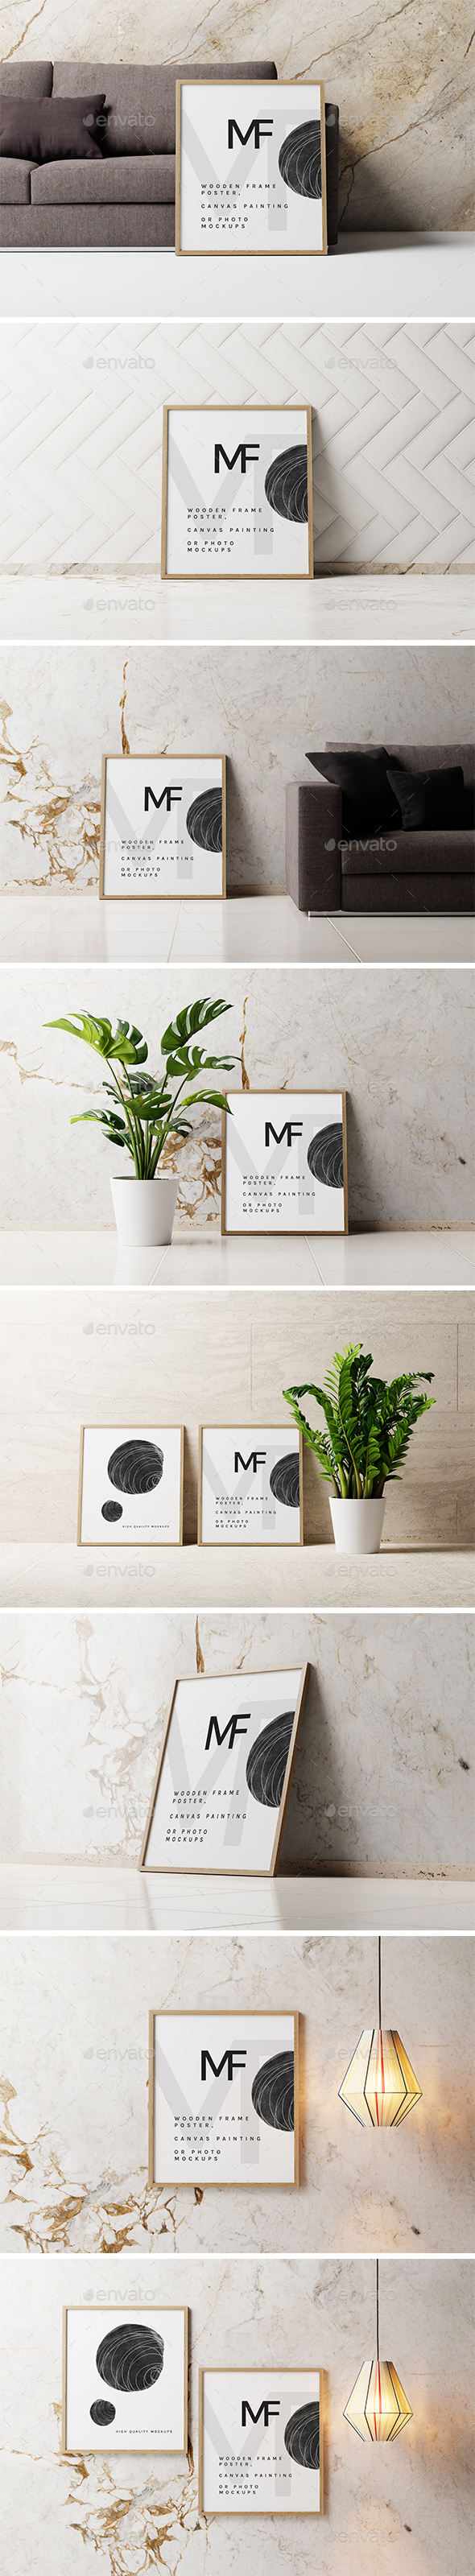 Canvas painting or Photo Mockups